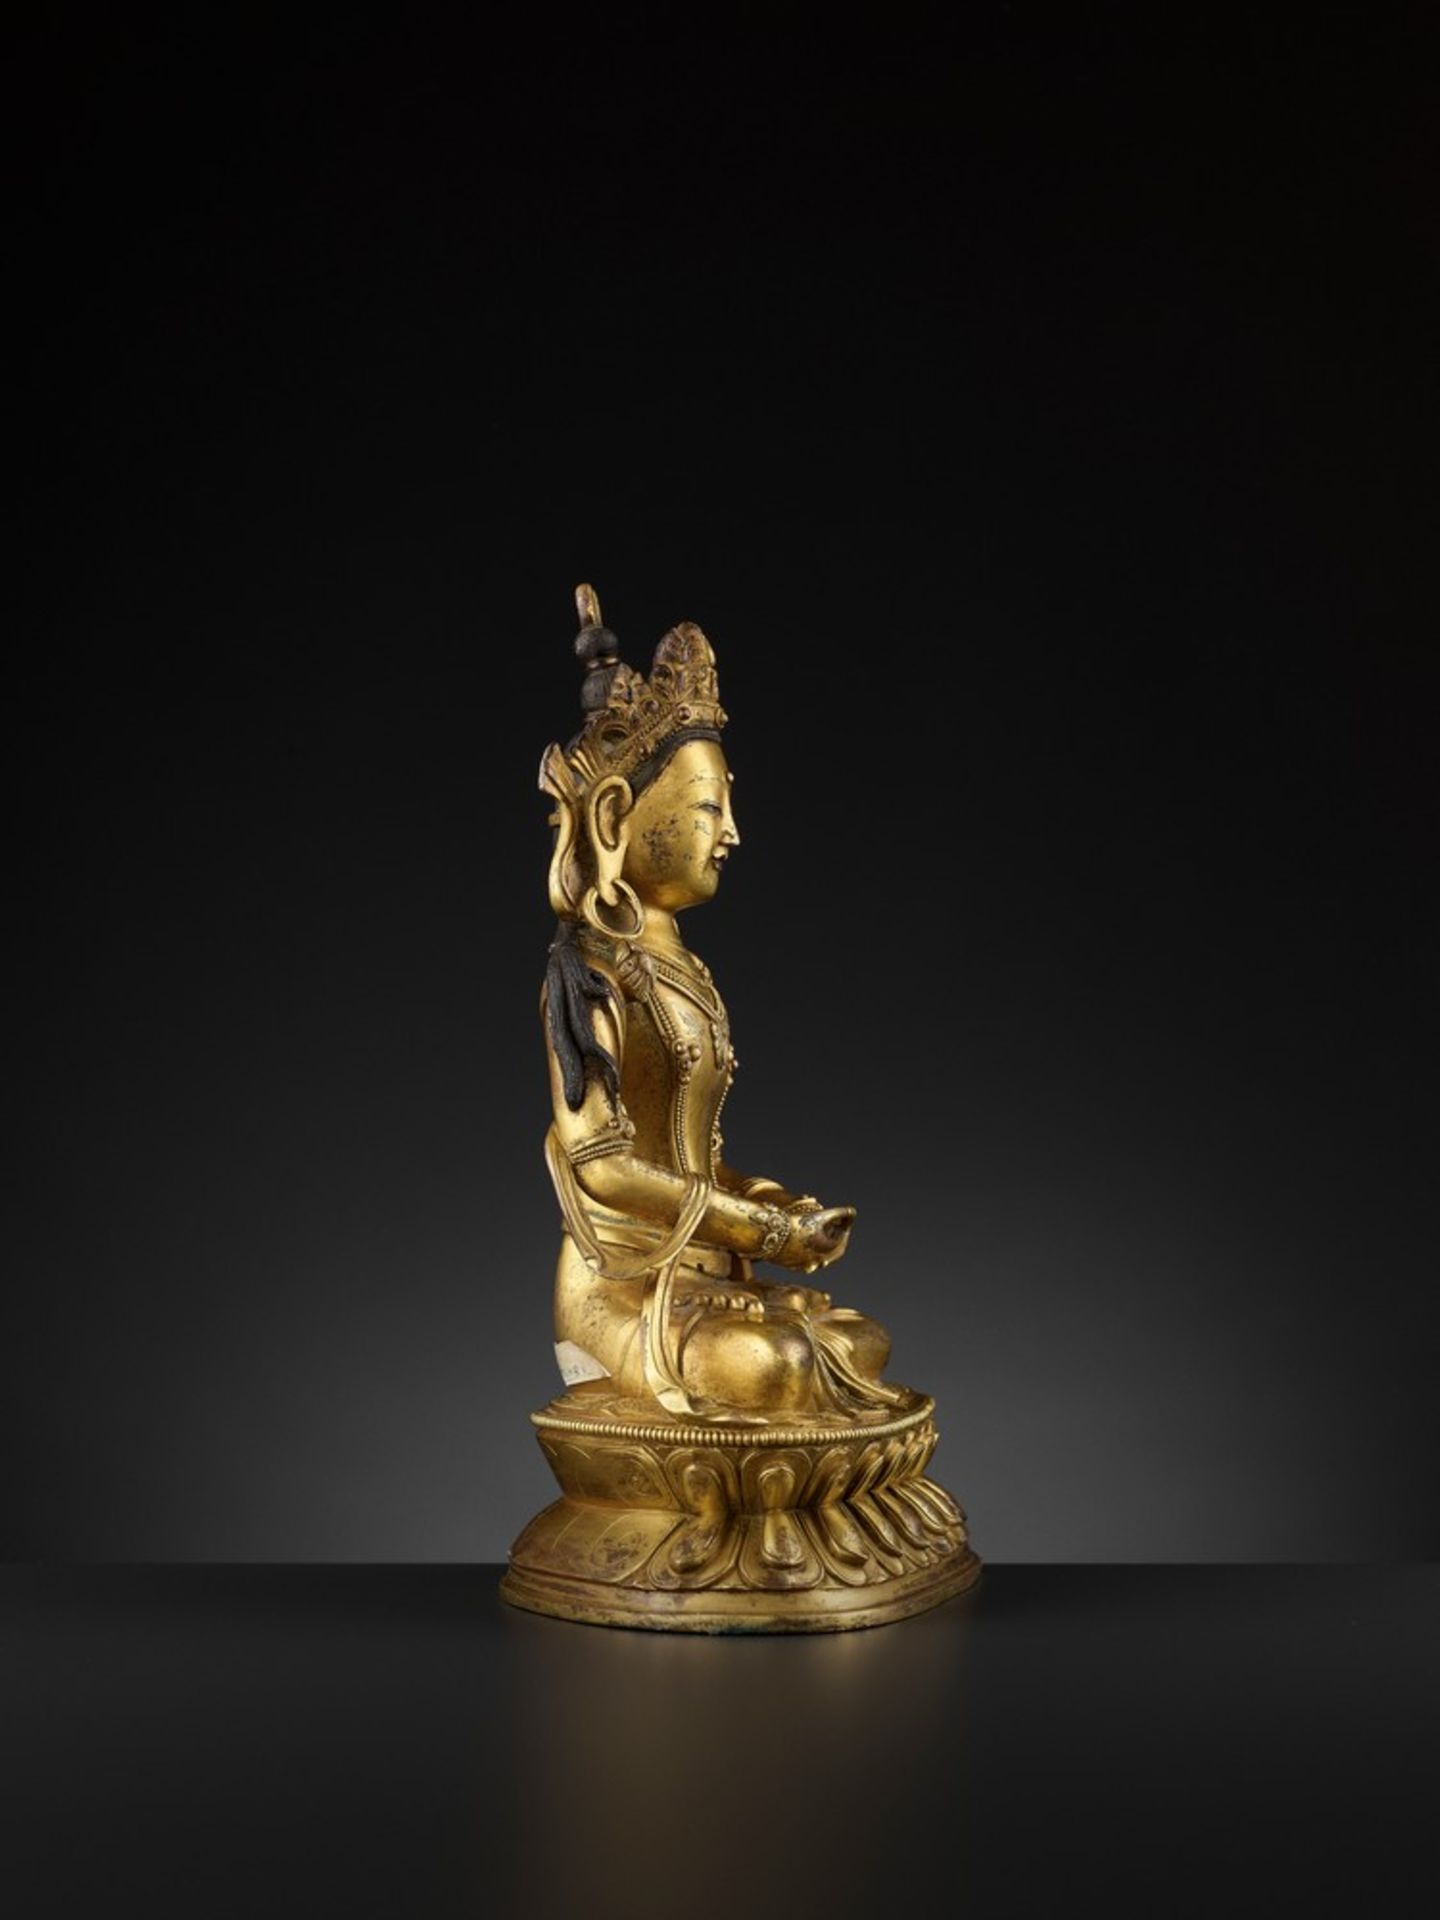 A LARGE GILT-BRONZE FIGURE OF AMITAYUS, LATE 17TH-18TH CENTURY - Image 8 of 13